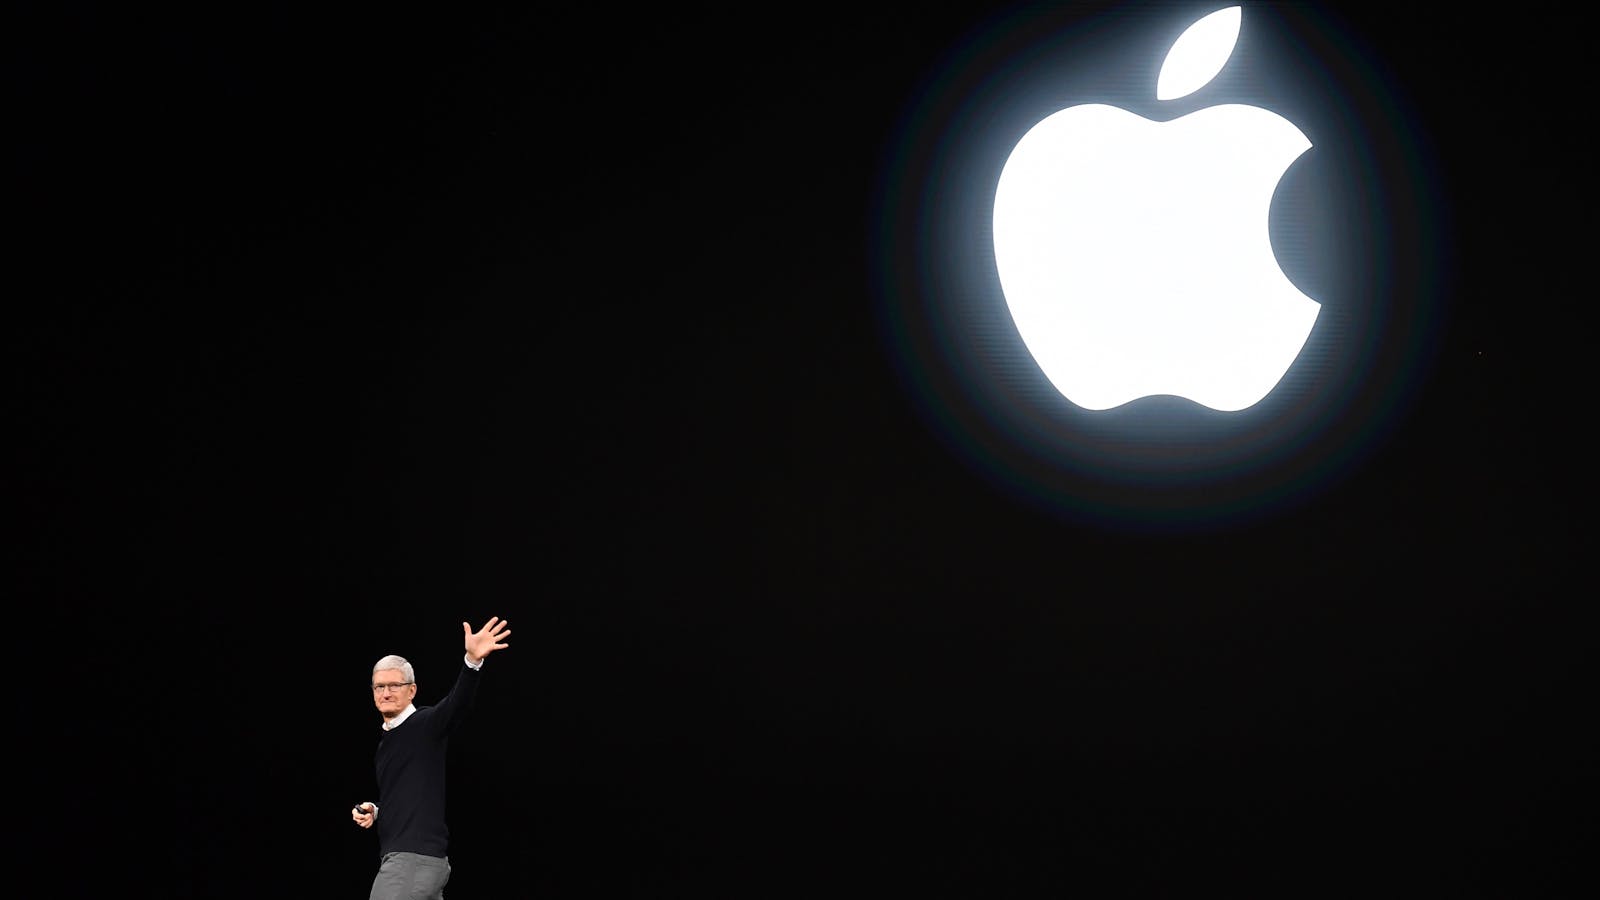 Apple CEO Tim Cook on stage at Apple's news and video presentation last month. Photo by Bloomberg.